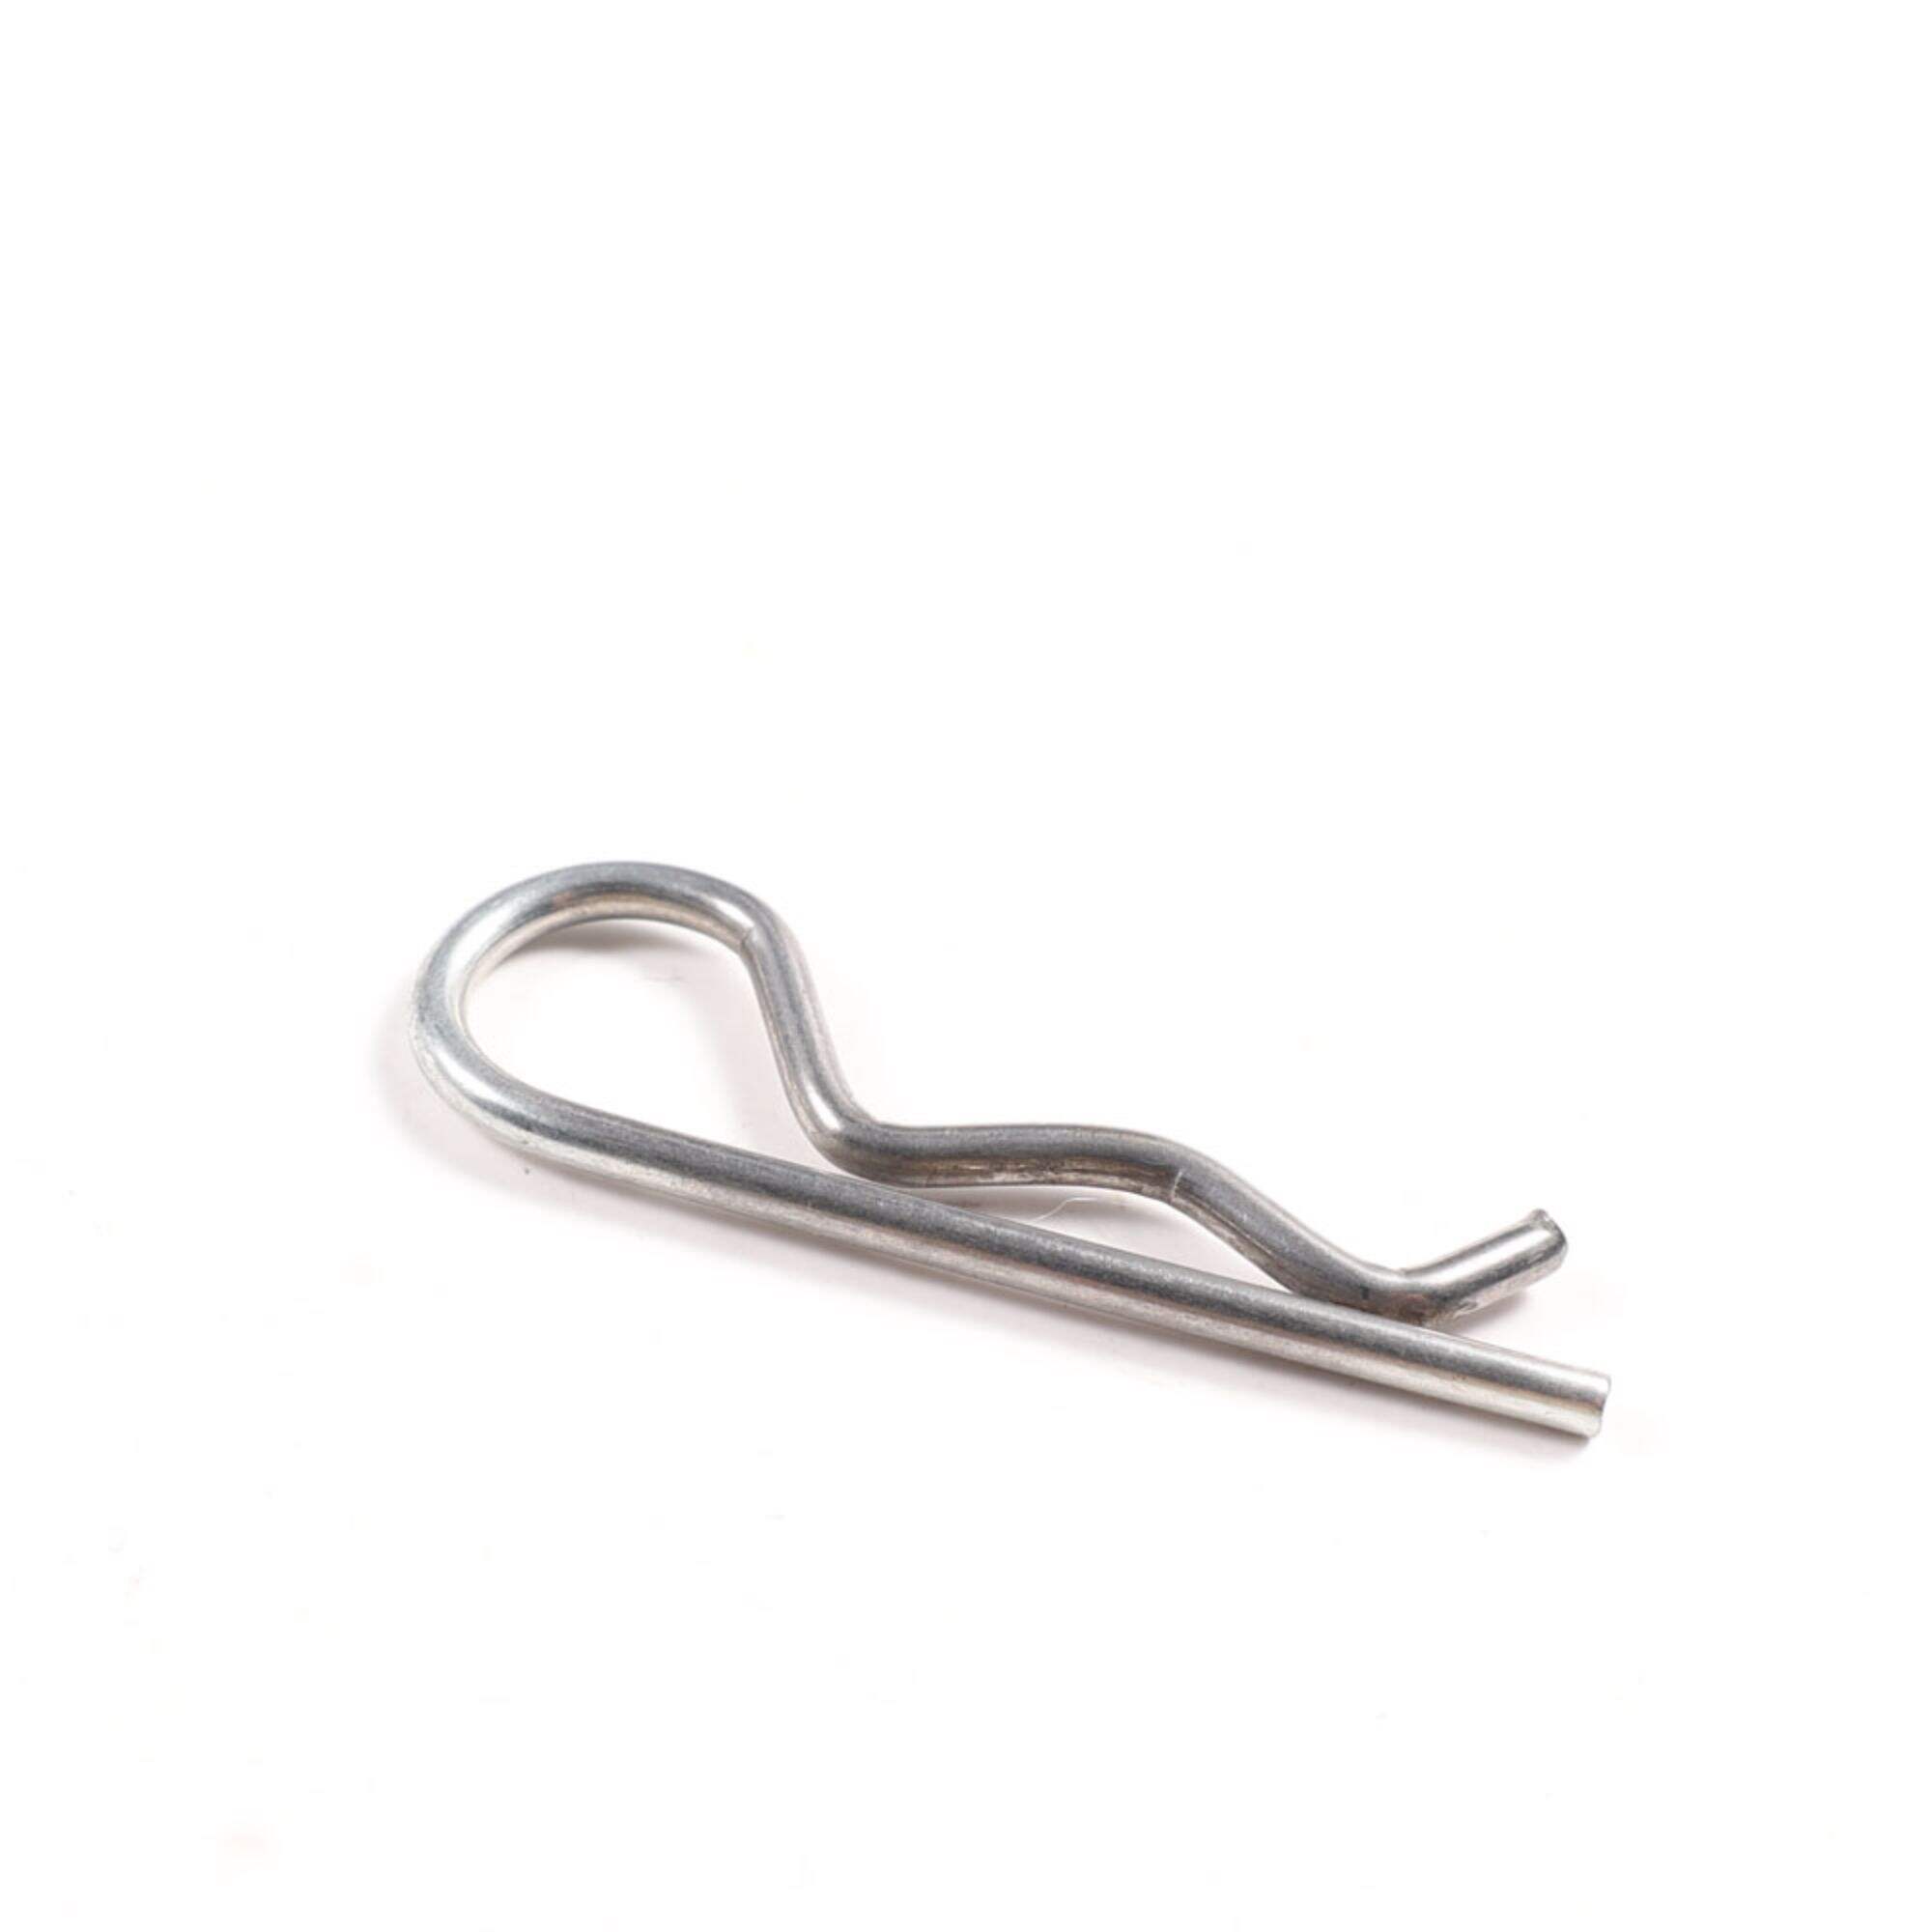 Customiztion 1/4 Diameter Grade 2 Steel Zinc Yellow-Plated Long Extended Prong Cotter Pin